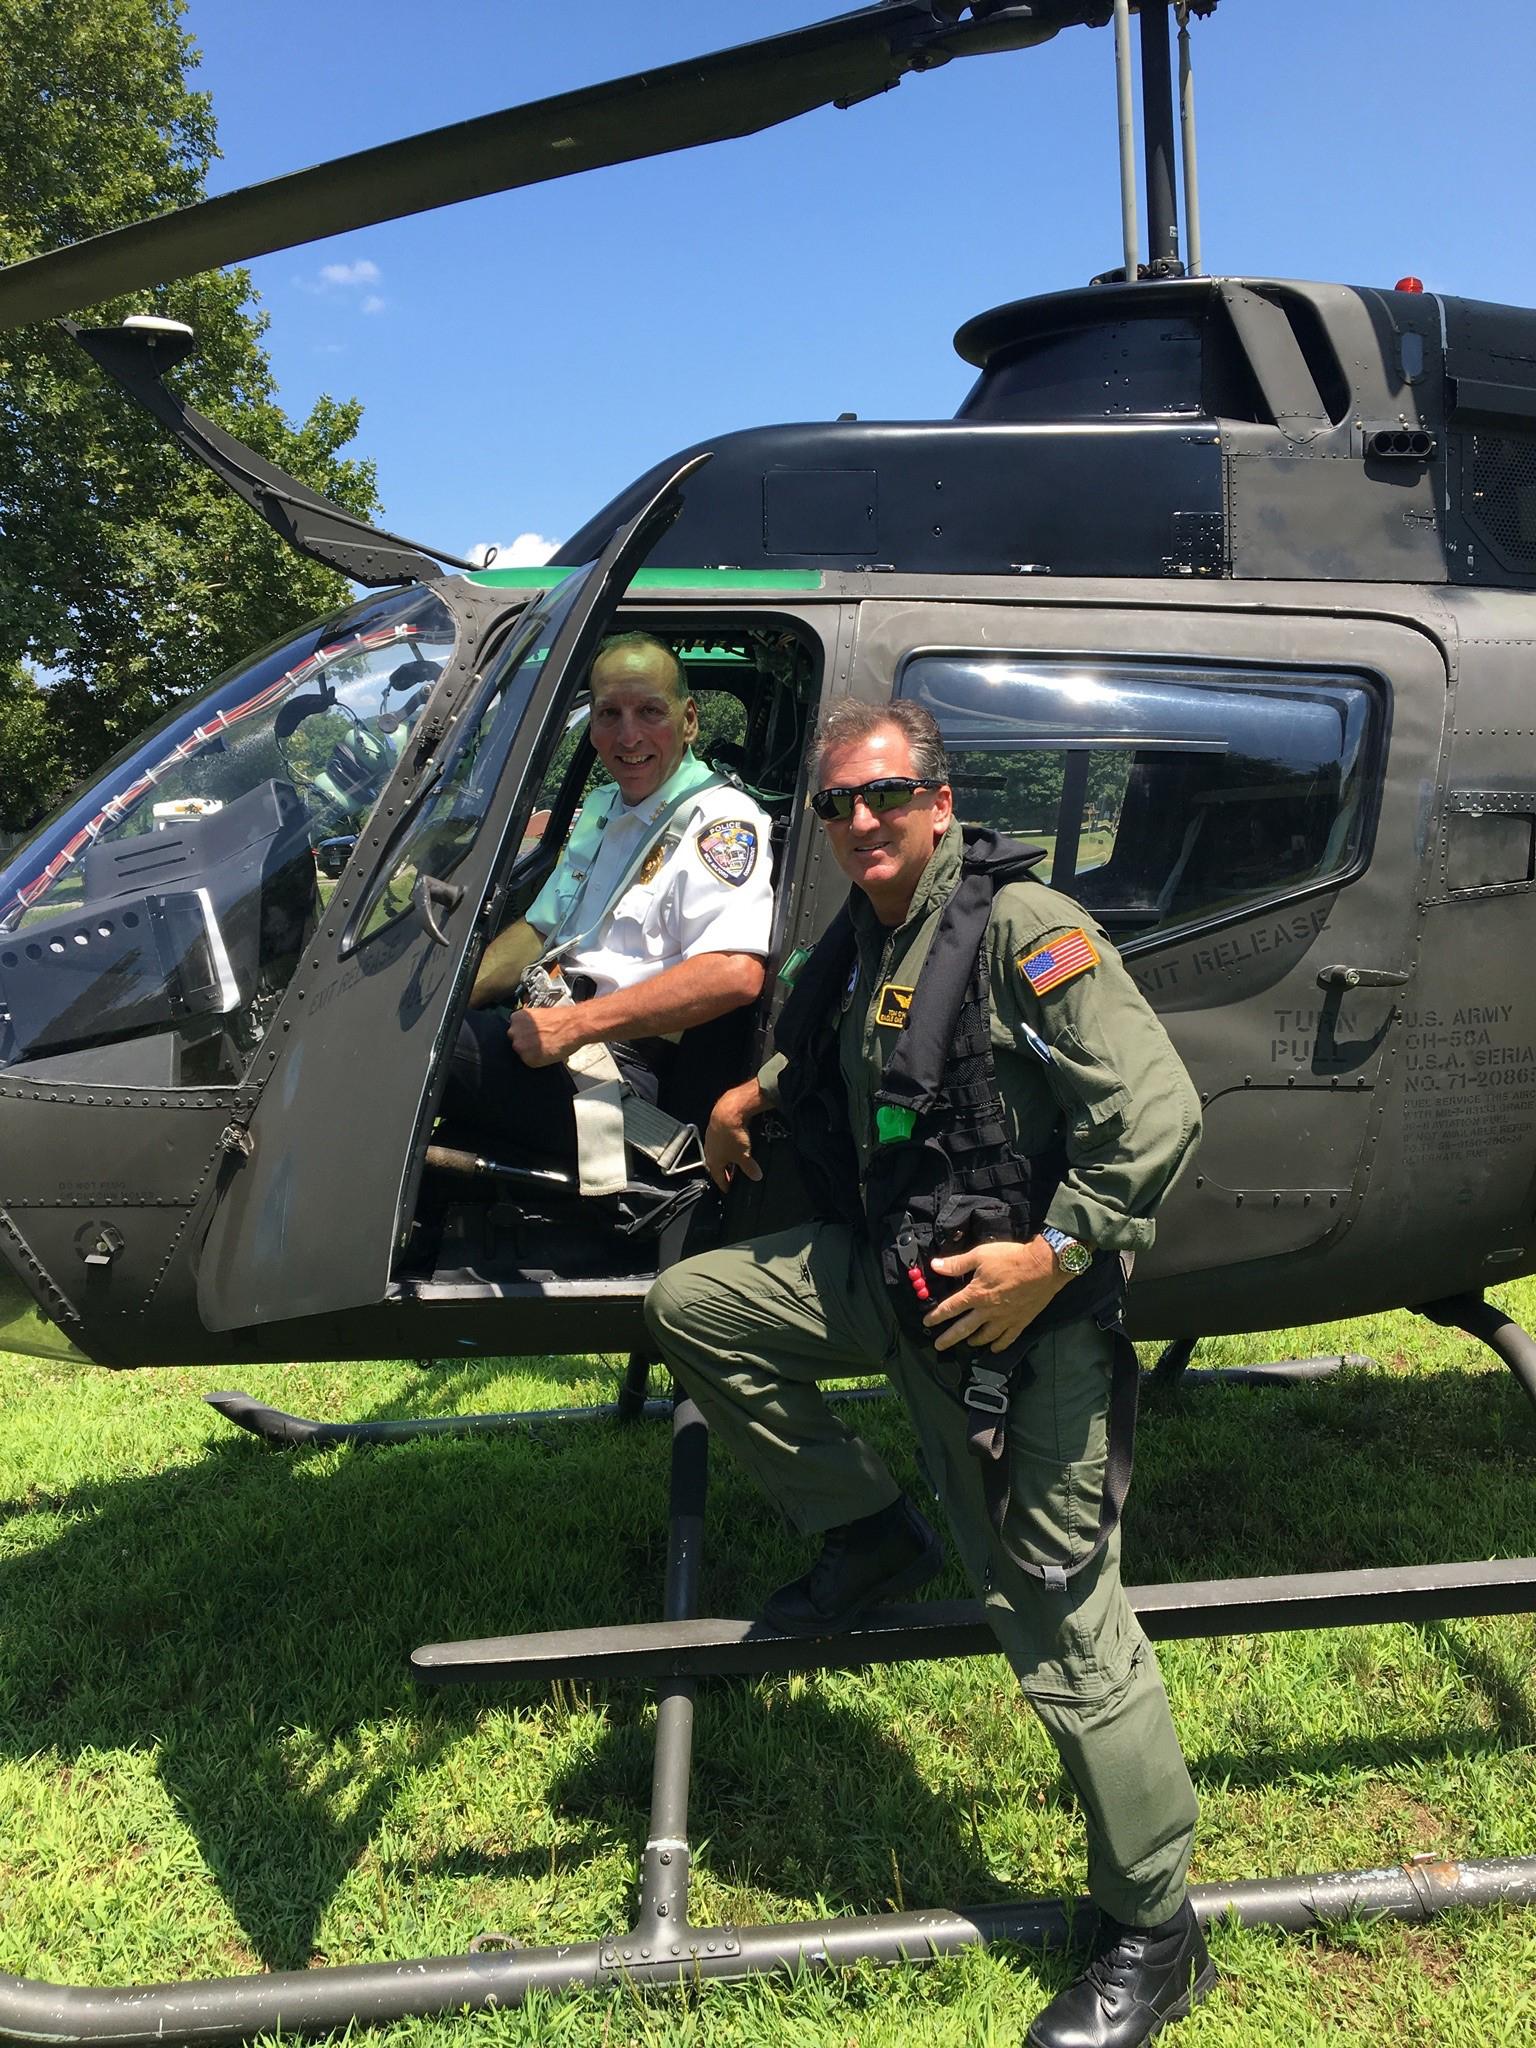 Volunteer Rescue Helicopter Program Expands To New Milford